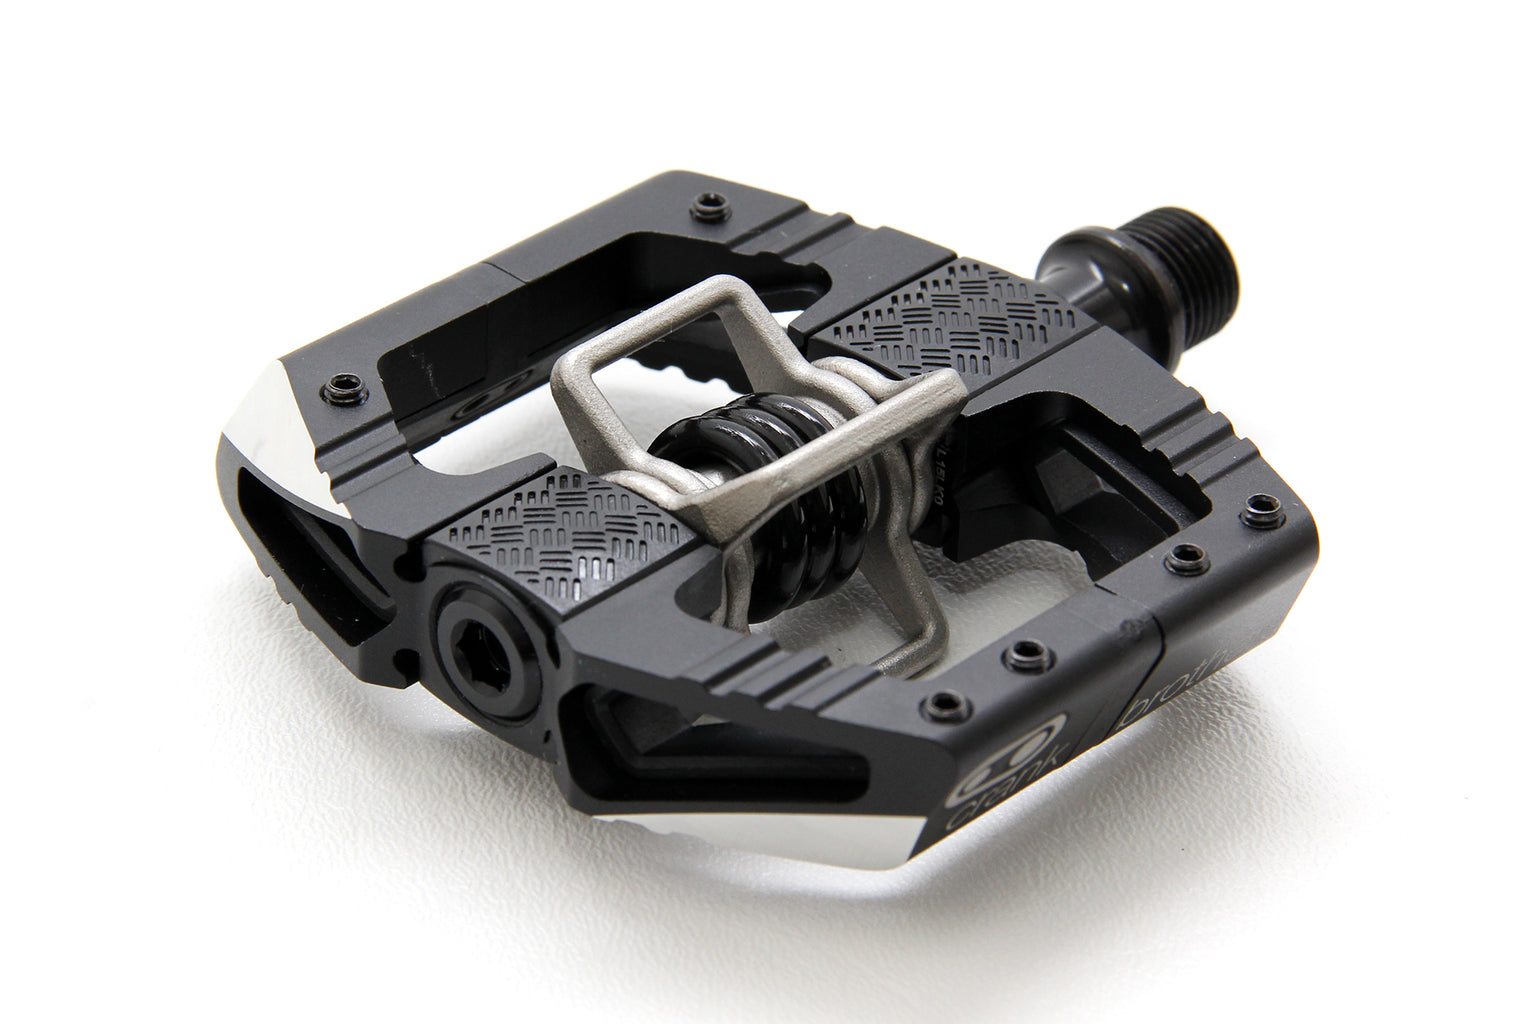 Crank Brothers Mallet Enduro Pedals - Dual Sided Clipless with Platform, Aluminum, 9/16", Black MPN: 15990 UPC: 641300159908 Pedals Mallet E Pedals